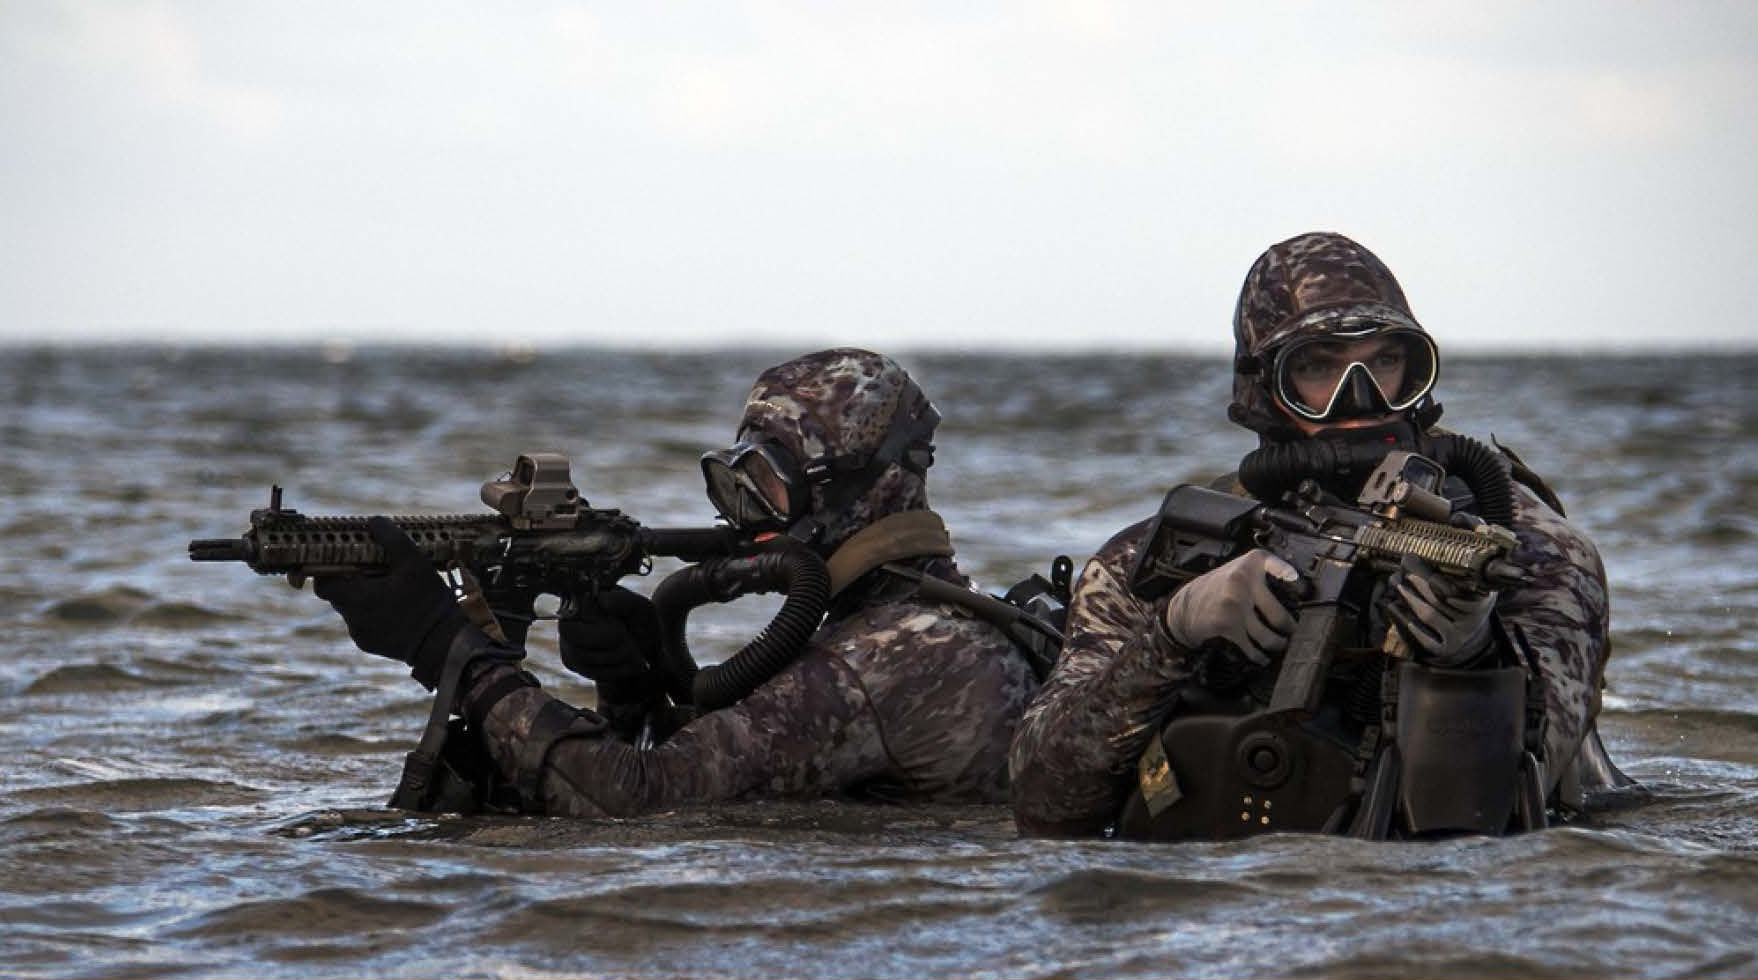 A member assigned to Naval Special Warfare Group 2 conducts military dive operations off the East Coast of the United States. (U.S. Navy photo by Senior Chief Mass Communication Specialist Jayme Pastoric/Released). The appearance of US Department of Defense (DOD) visual information does not imply or constitute DoD endorsement.